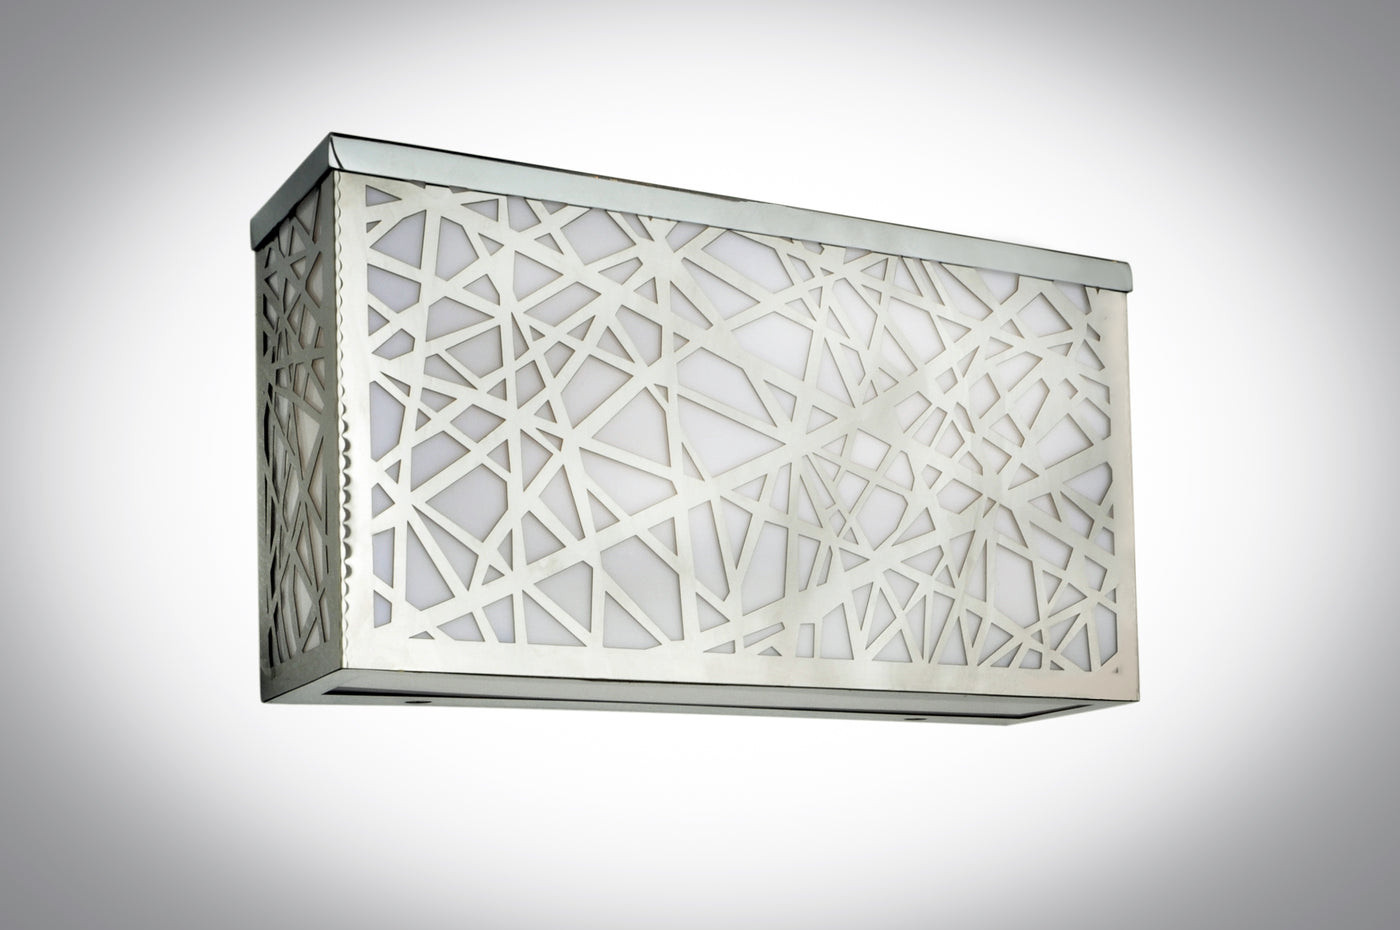  Inca LED Large Outdoor Wall Sconce E21336-61PC Wall Sconce